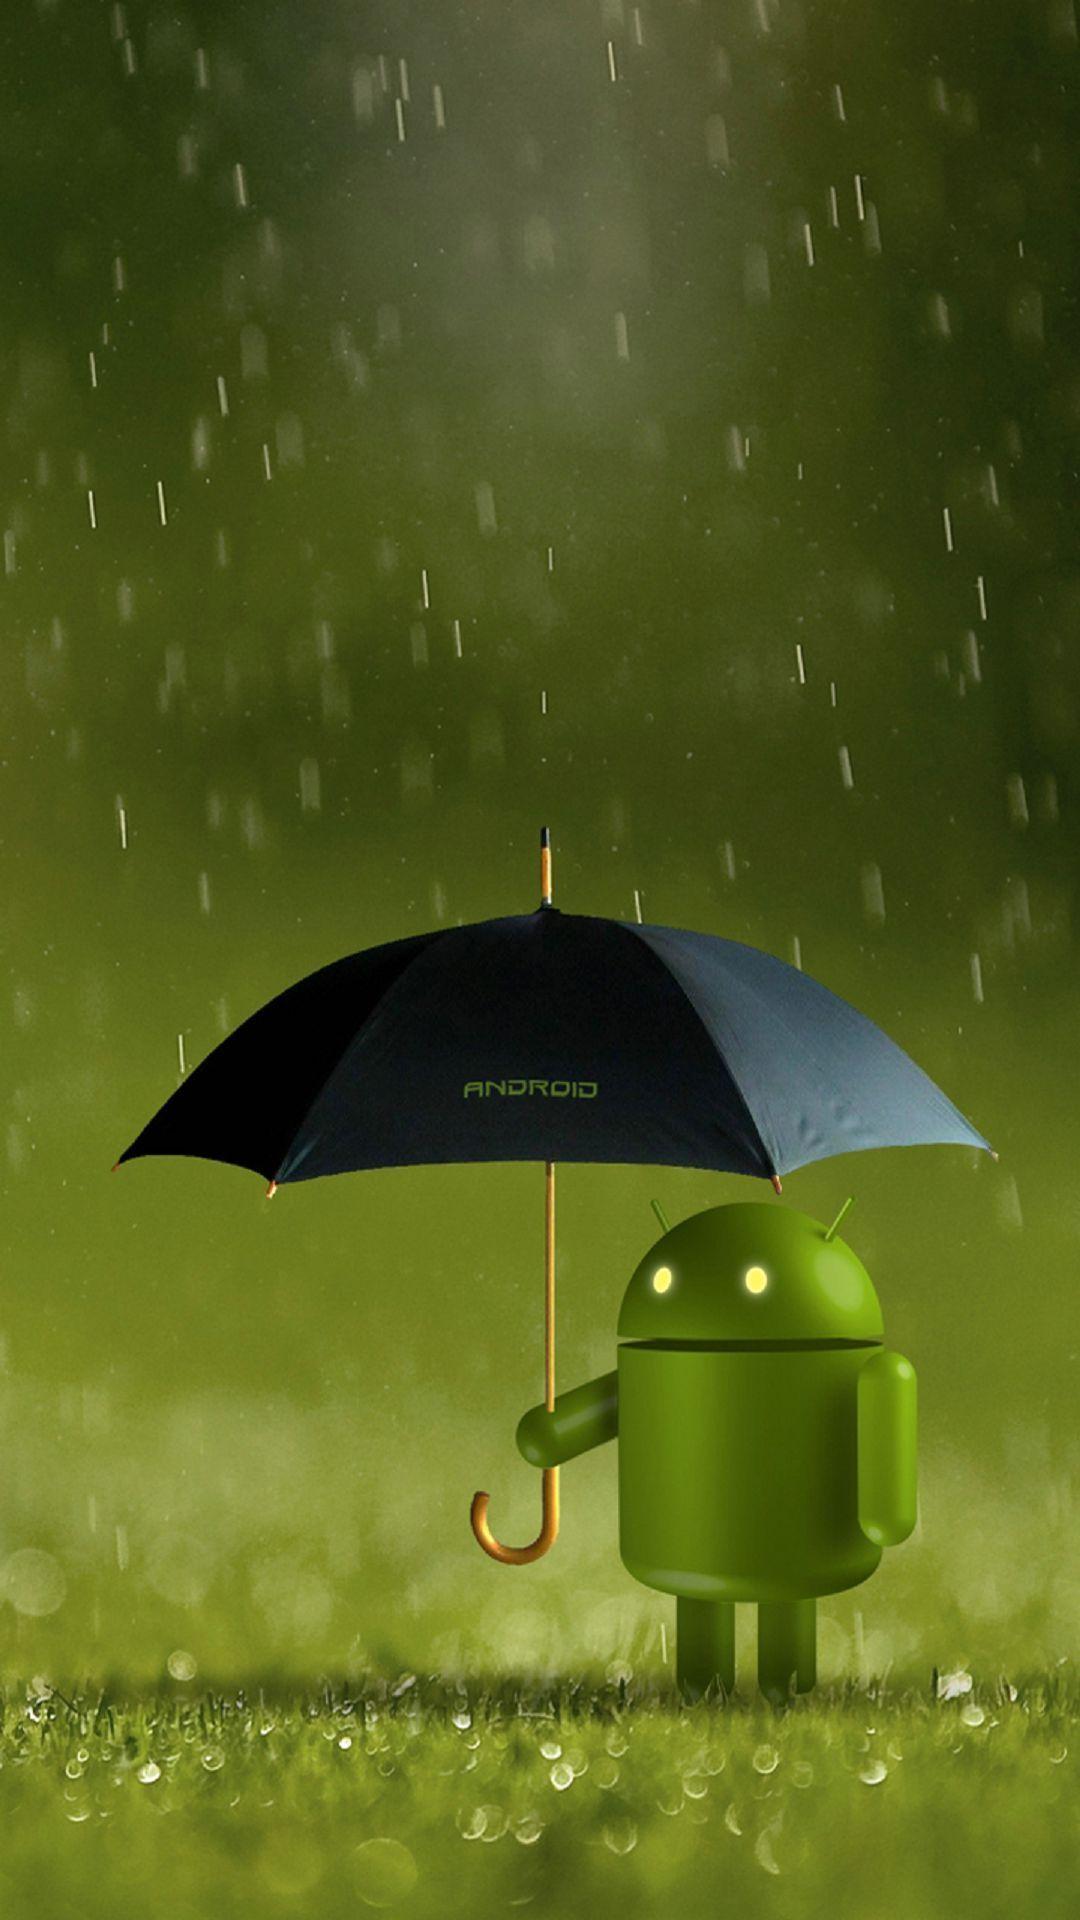 Android Robot Wallpaper For JPEG Image, 1080 × 1920